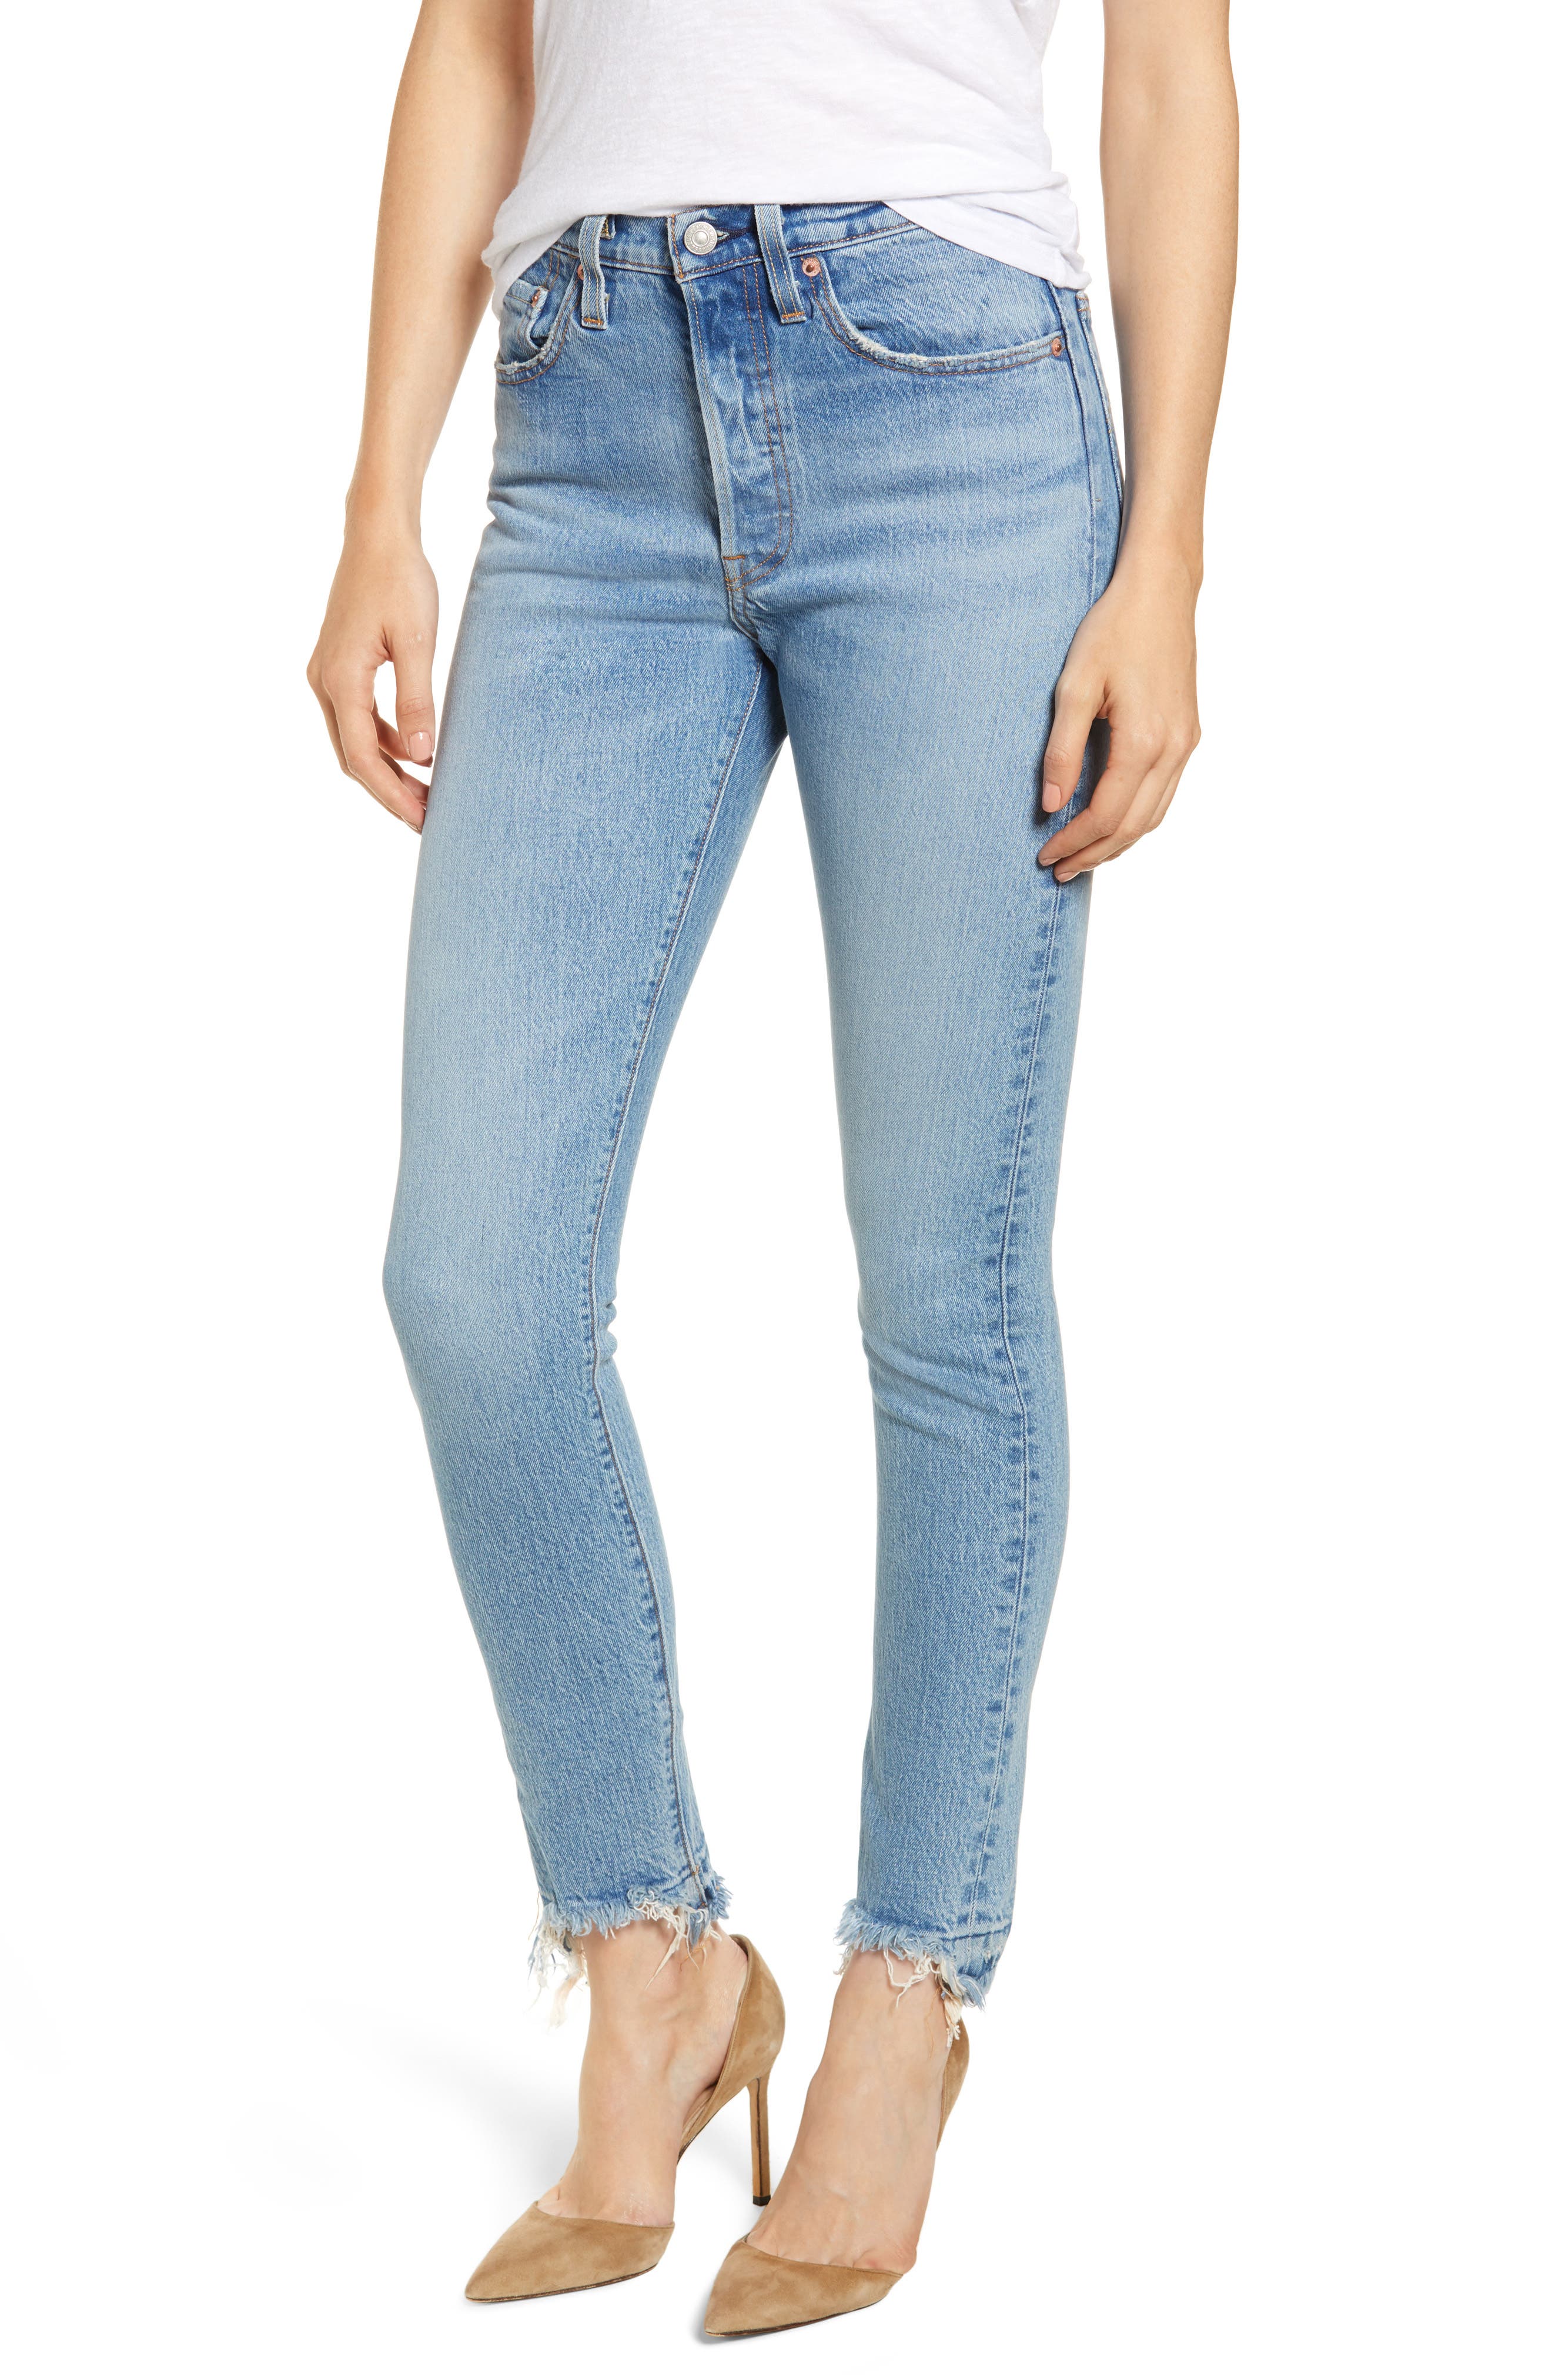 501 high rise jeans